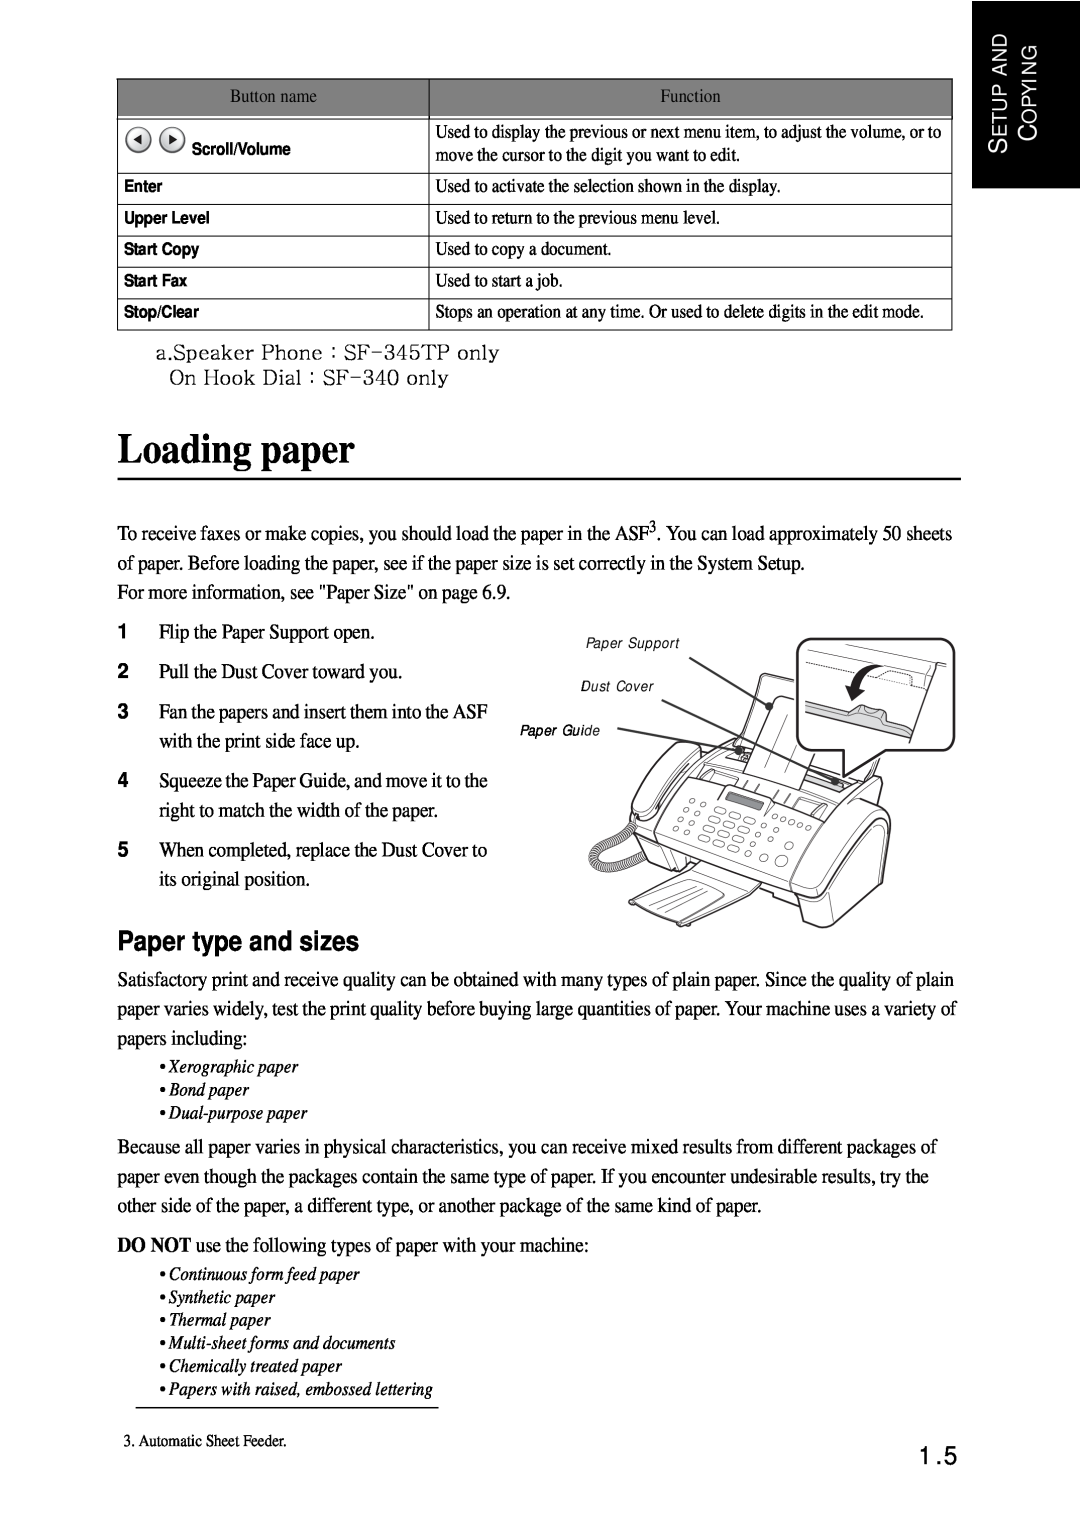 Samsung SF-340 Series manual Loading paper, Paper type and sizes 